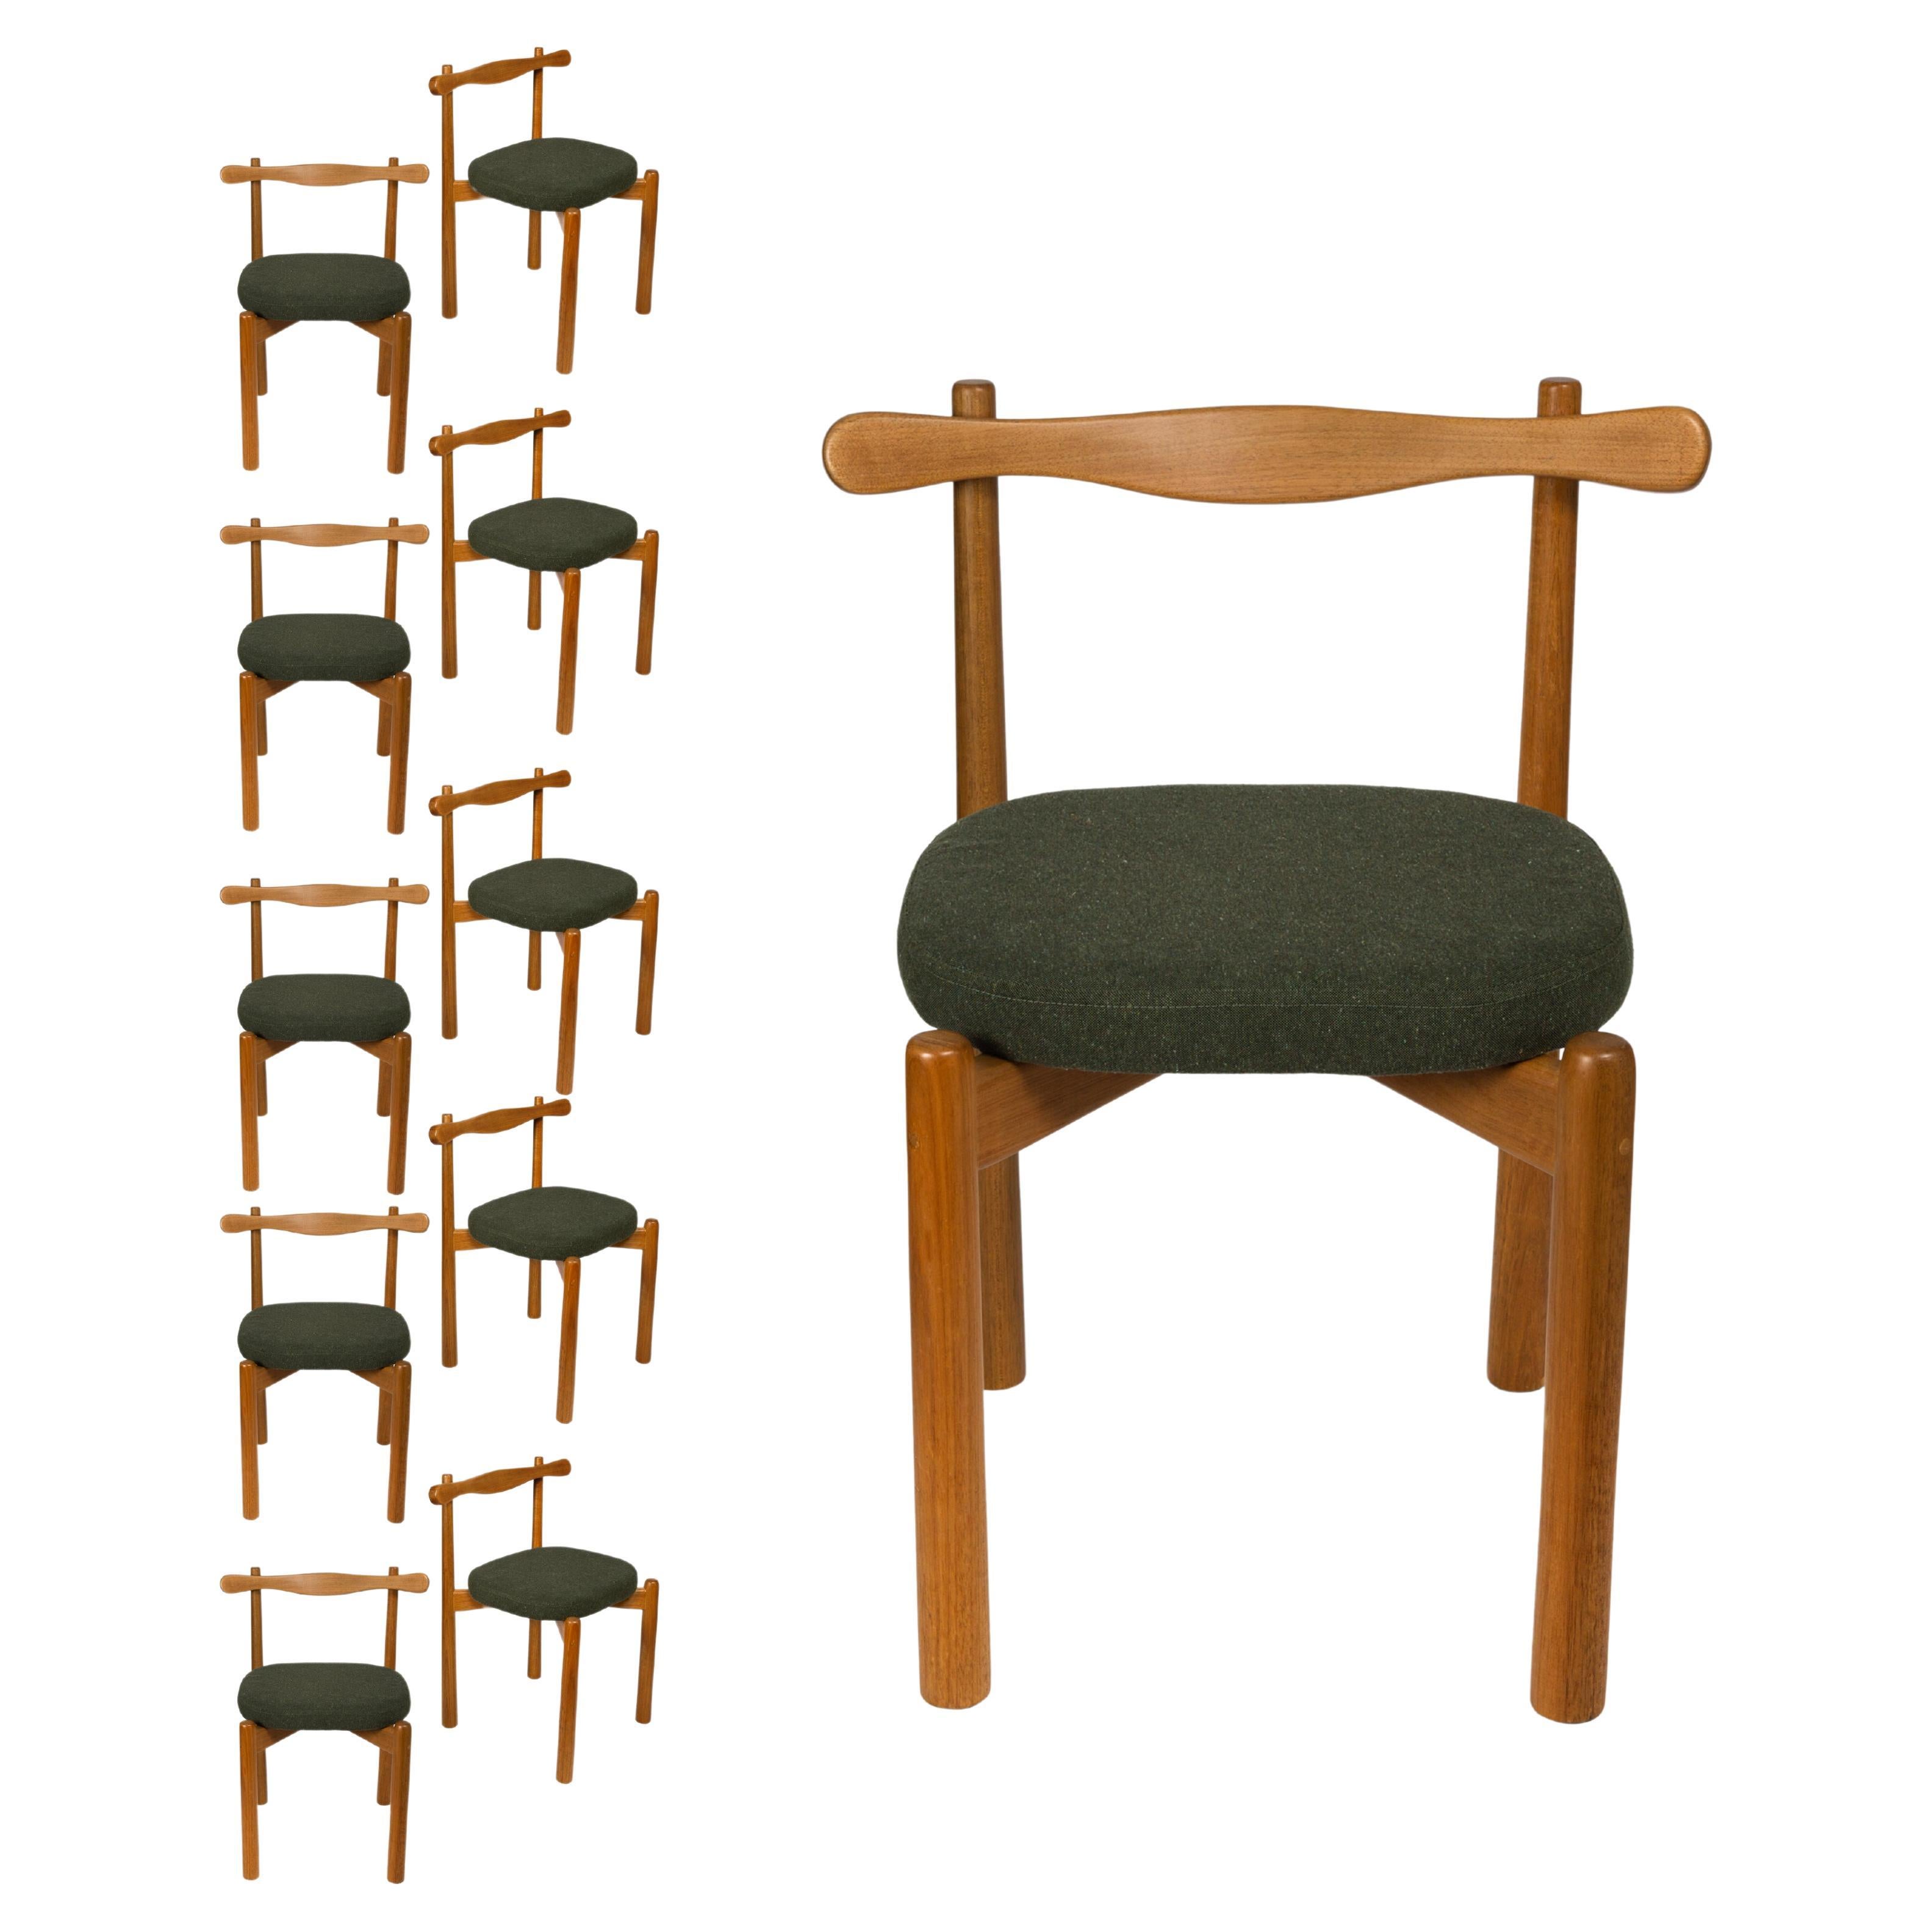 Set of 10 Dining Chairs Uçá Light Brown Wood (fabric ref : F17)